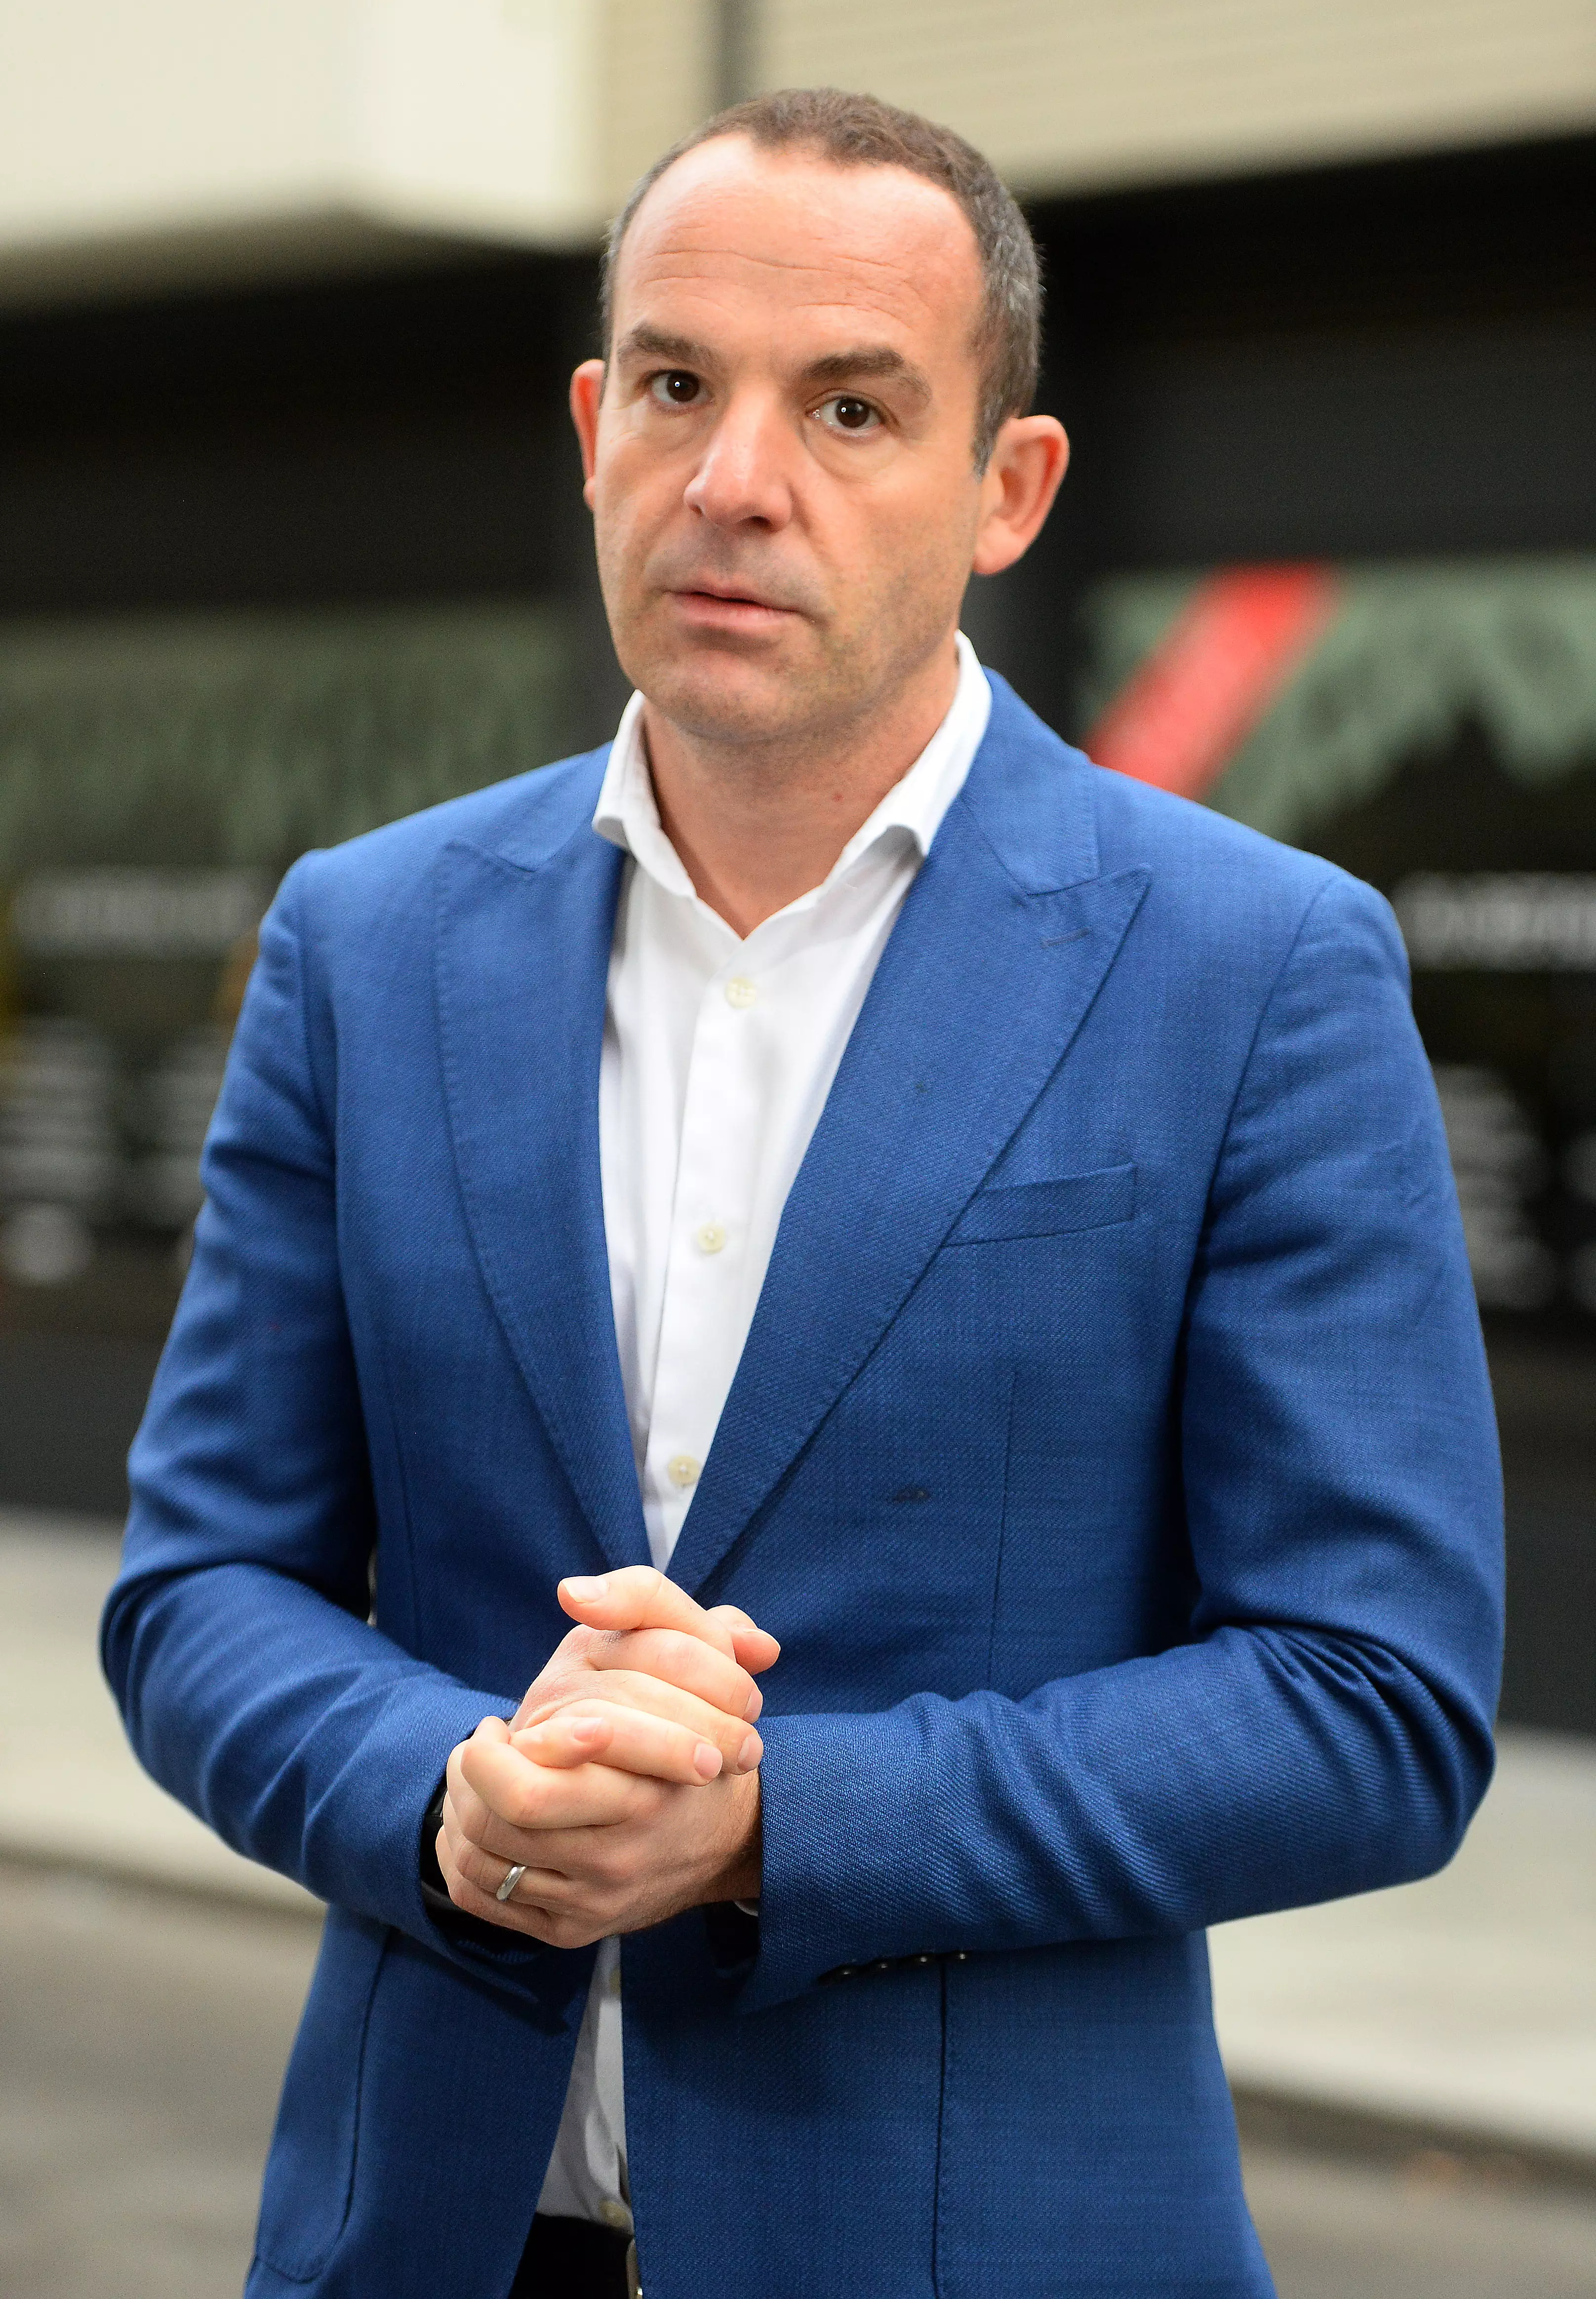 Martin Lewis was frustrated at the cinema wait time